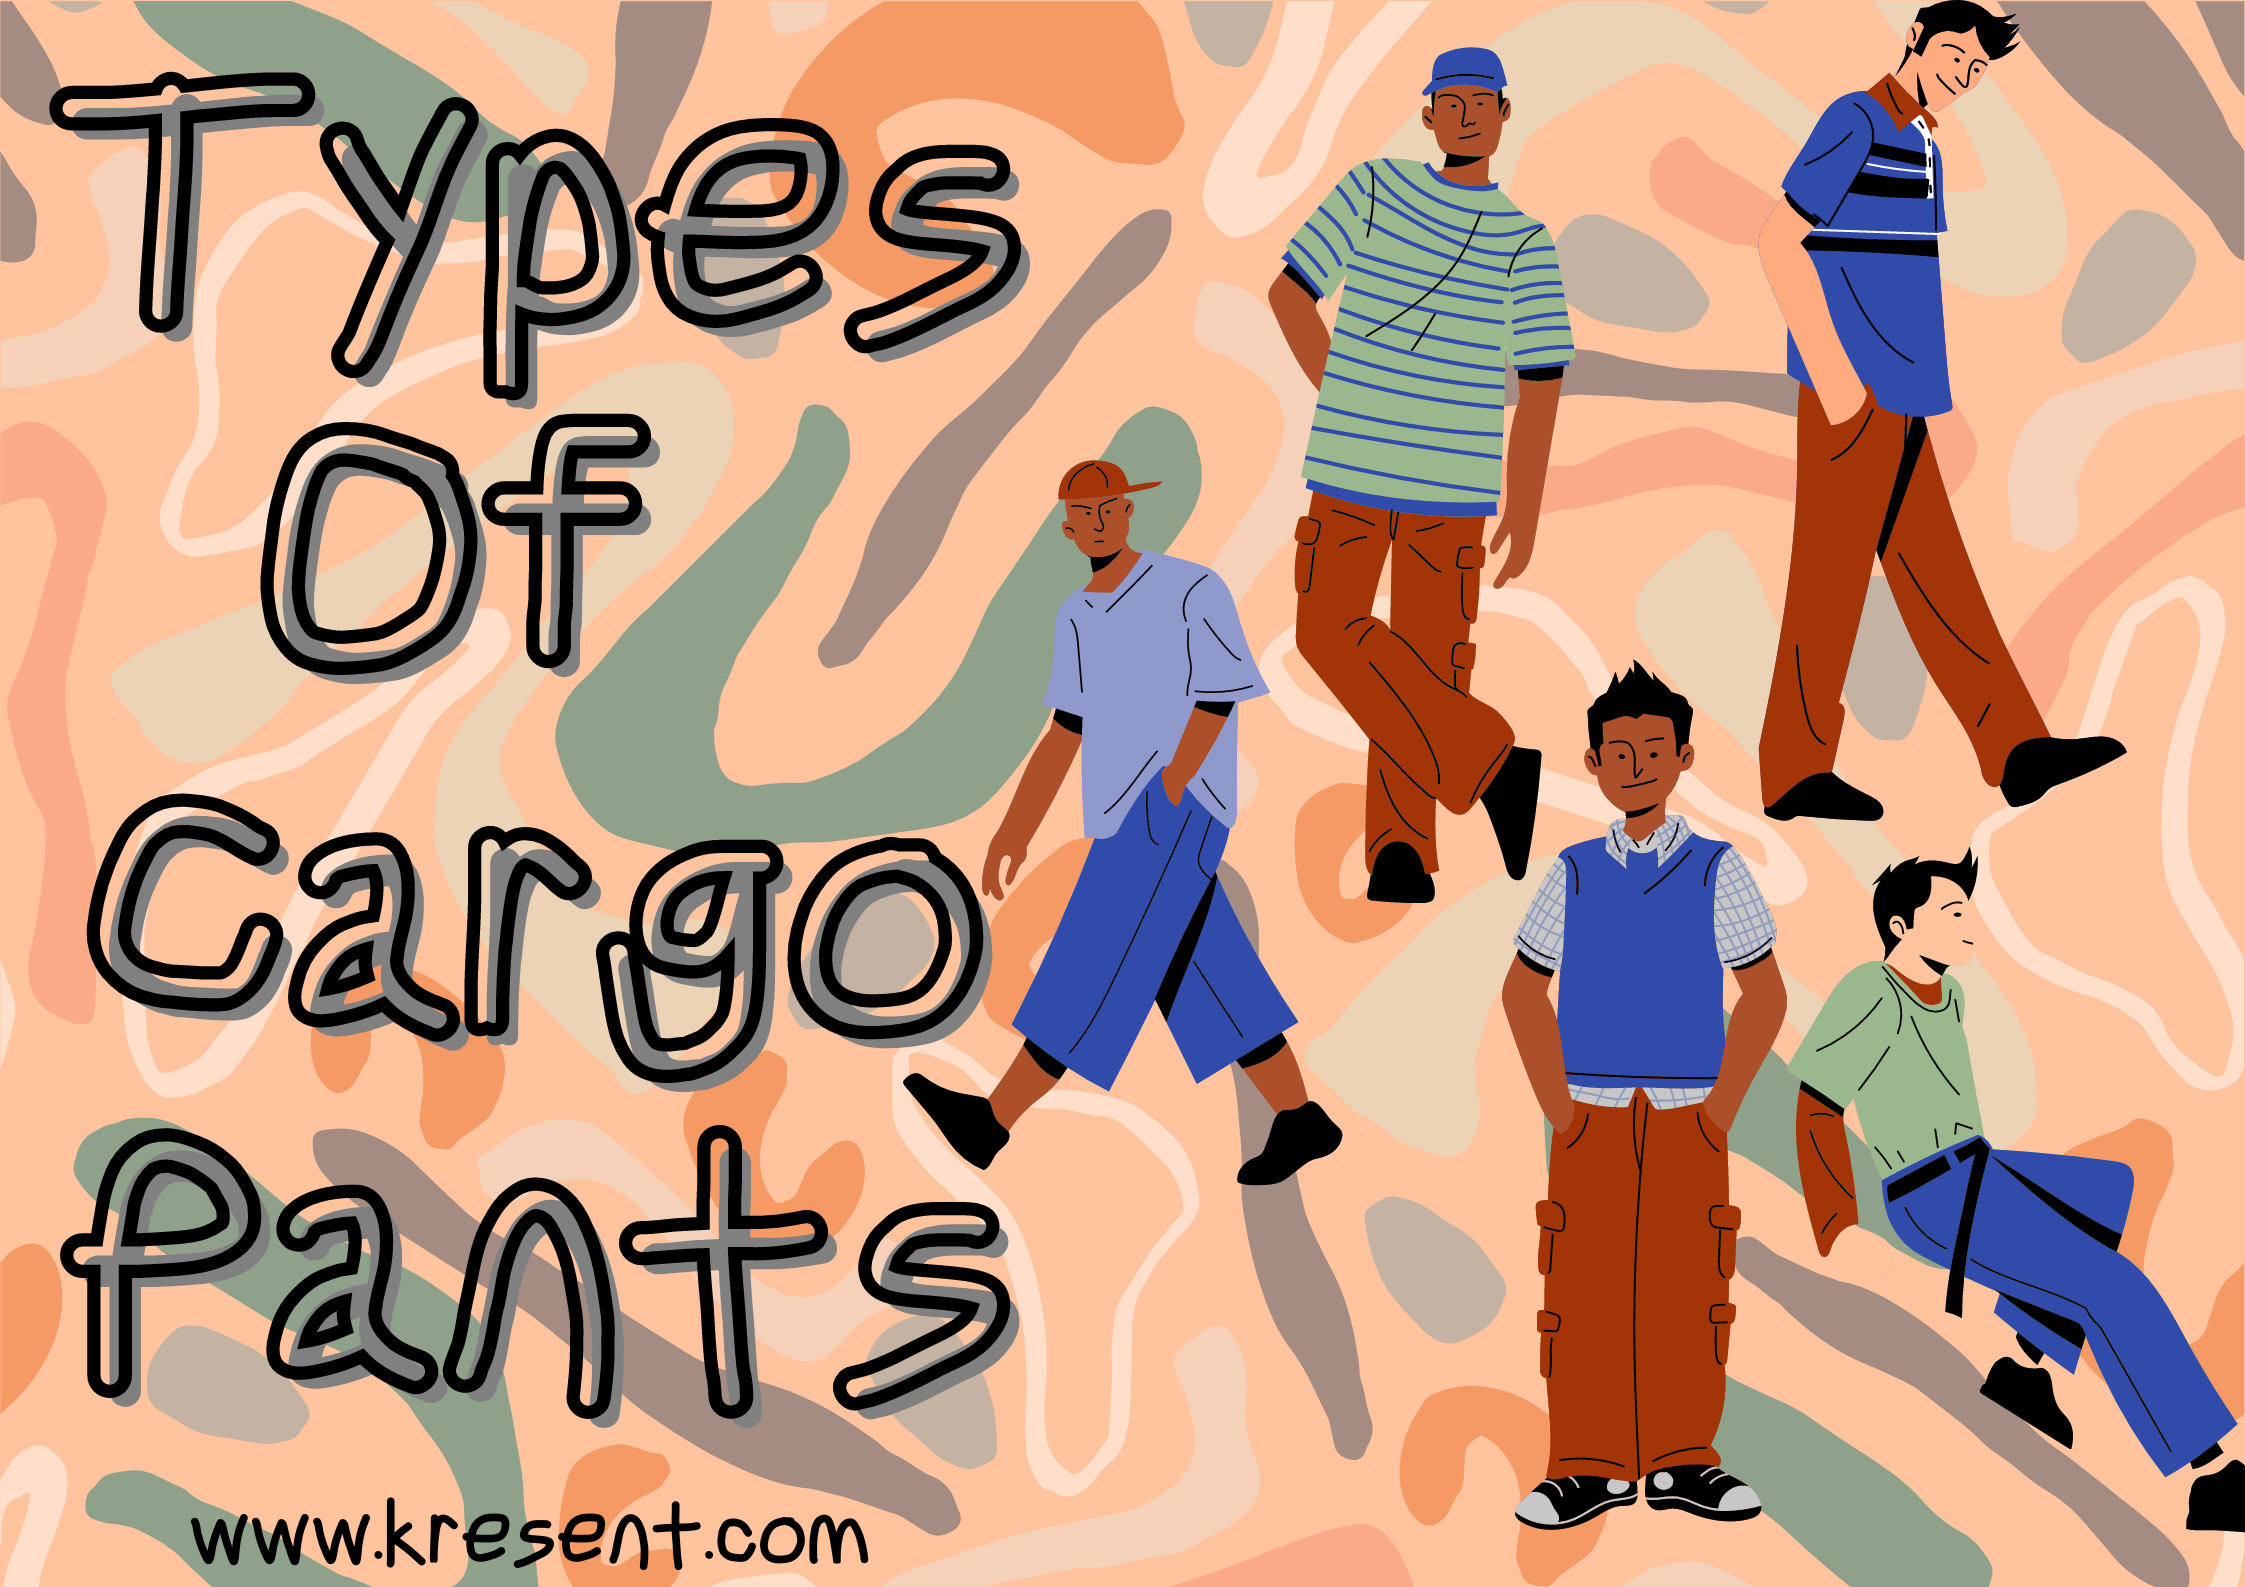 A brief history of cargo pants the militarys greatest fashion contribution